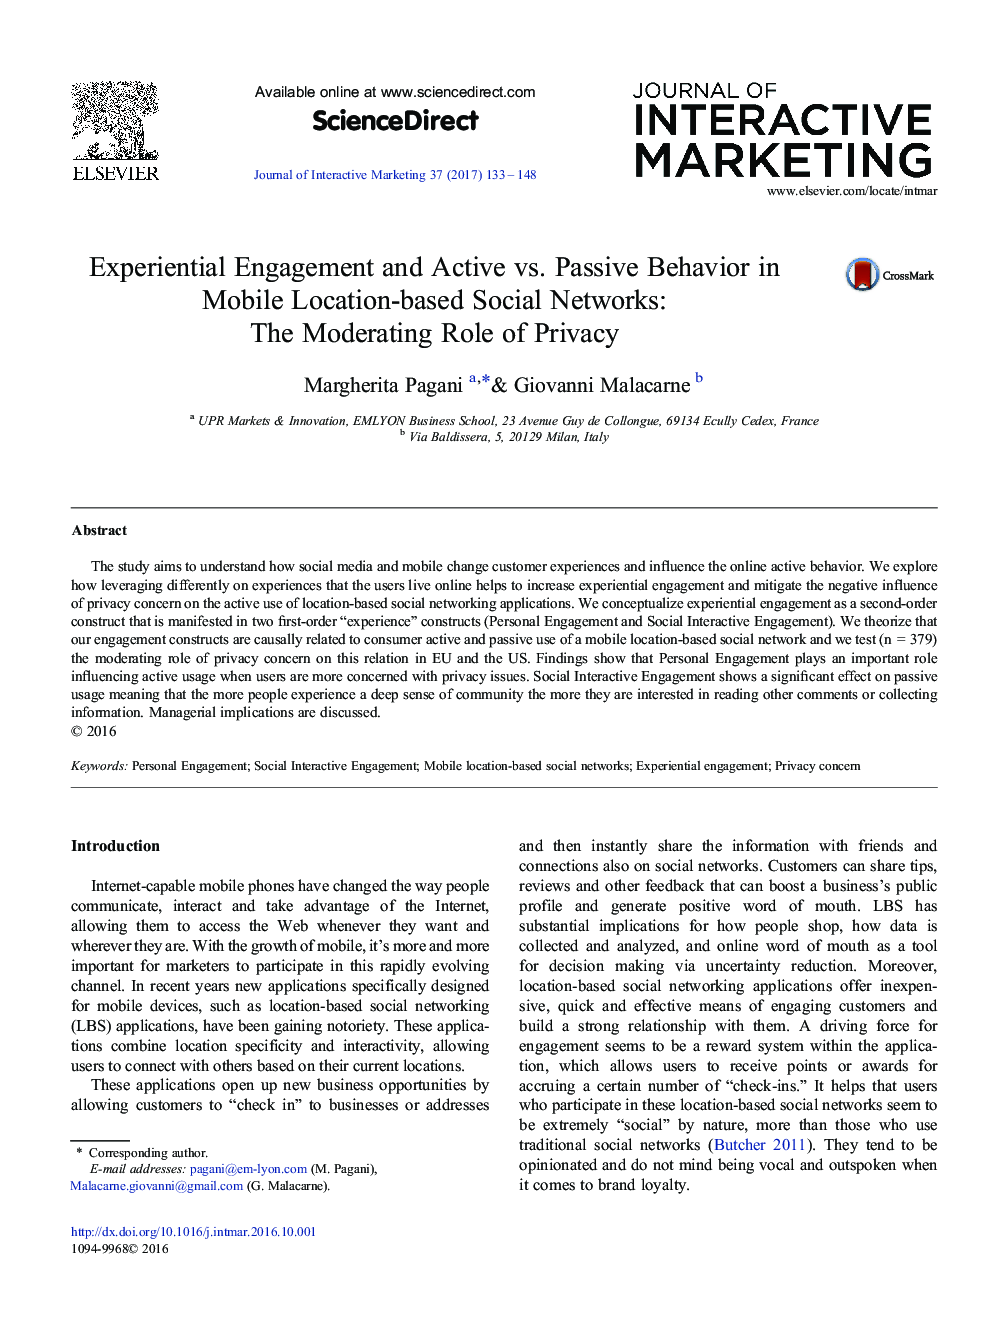 Experiential Engagement and Active vs. Passive Behavior in Mobile Location-based Social Networks: The Moderating Role of Privacy